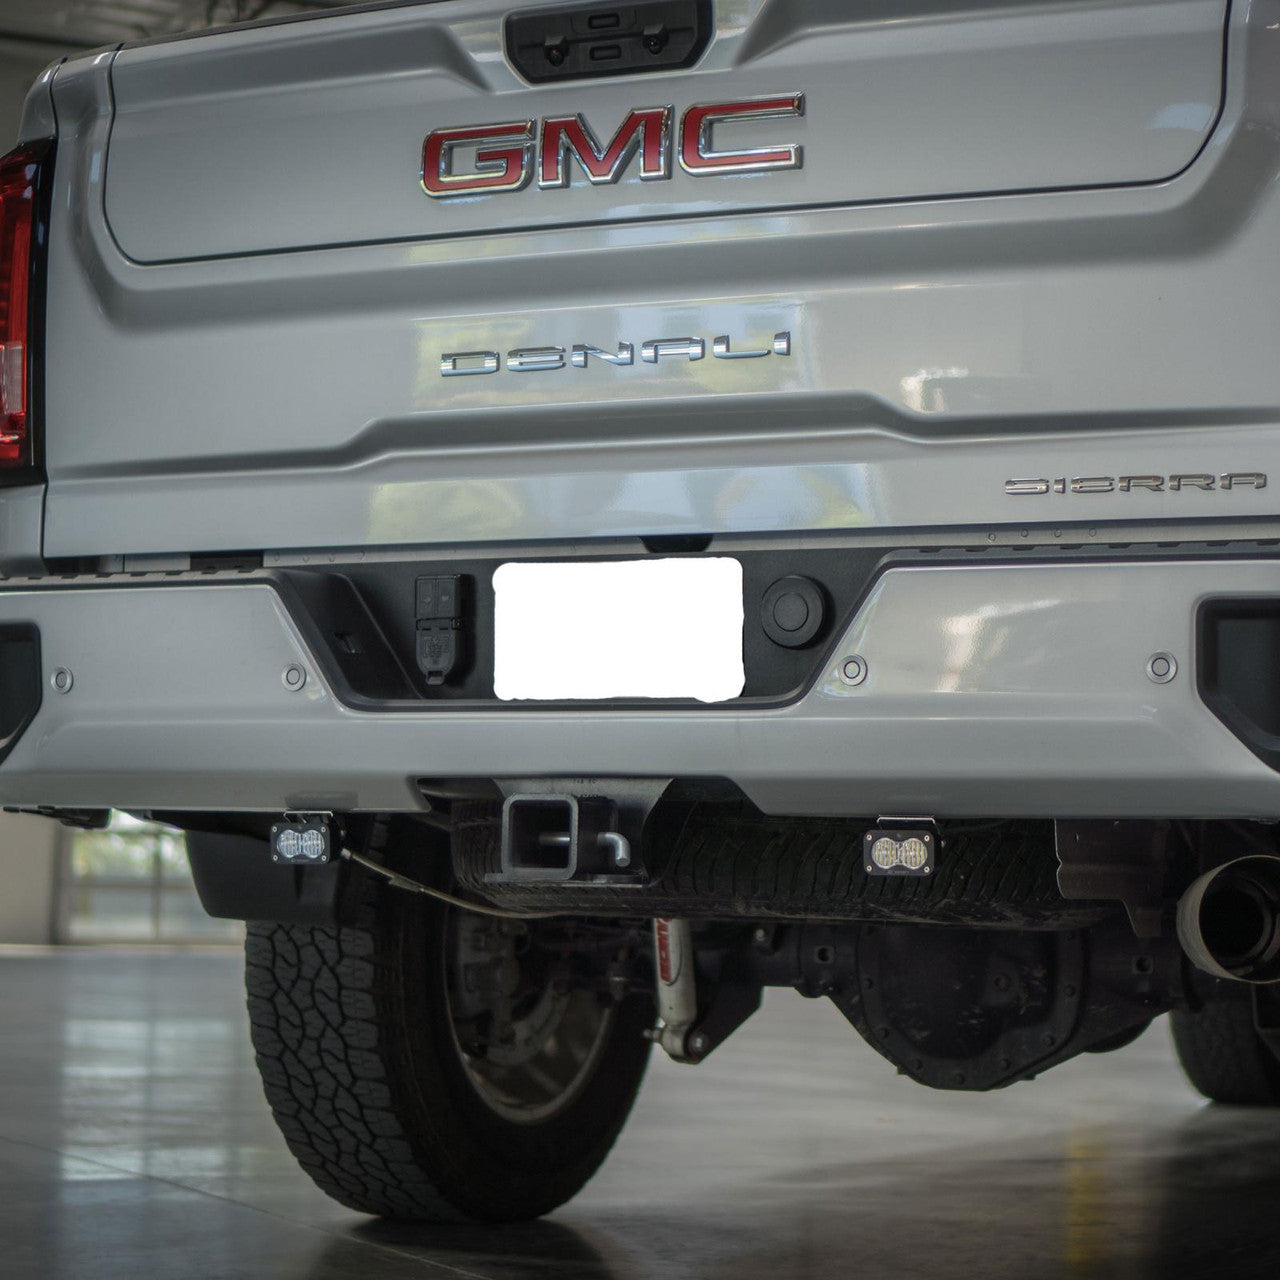 Shop All 2020+ GMC 2500/3500 Parts and Accessories